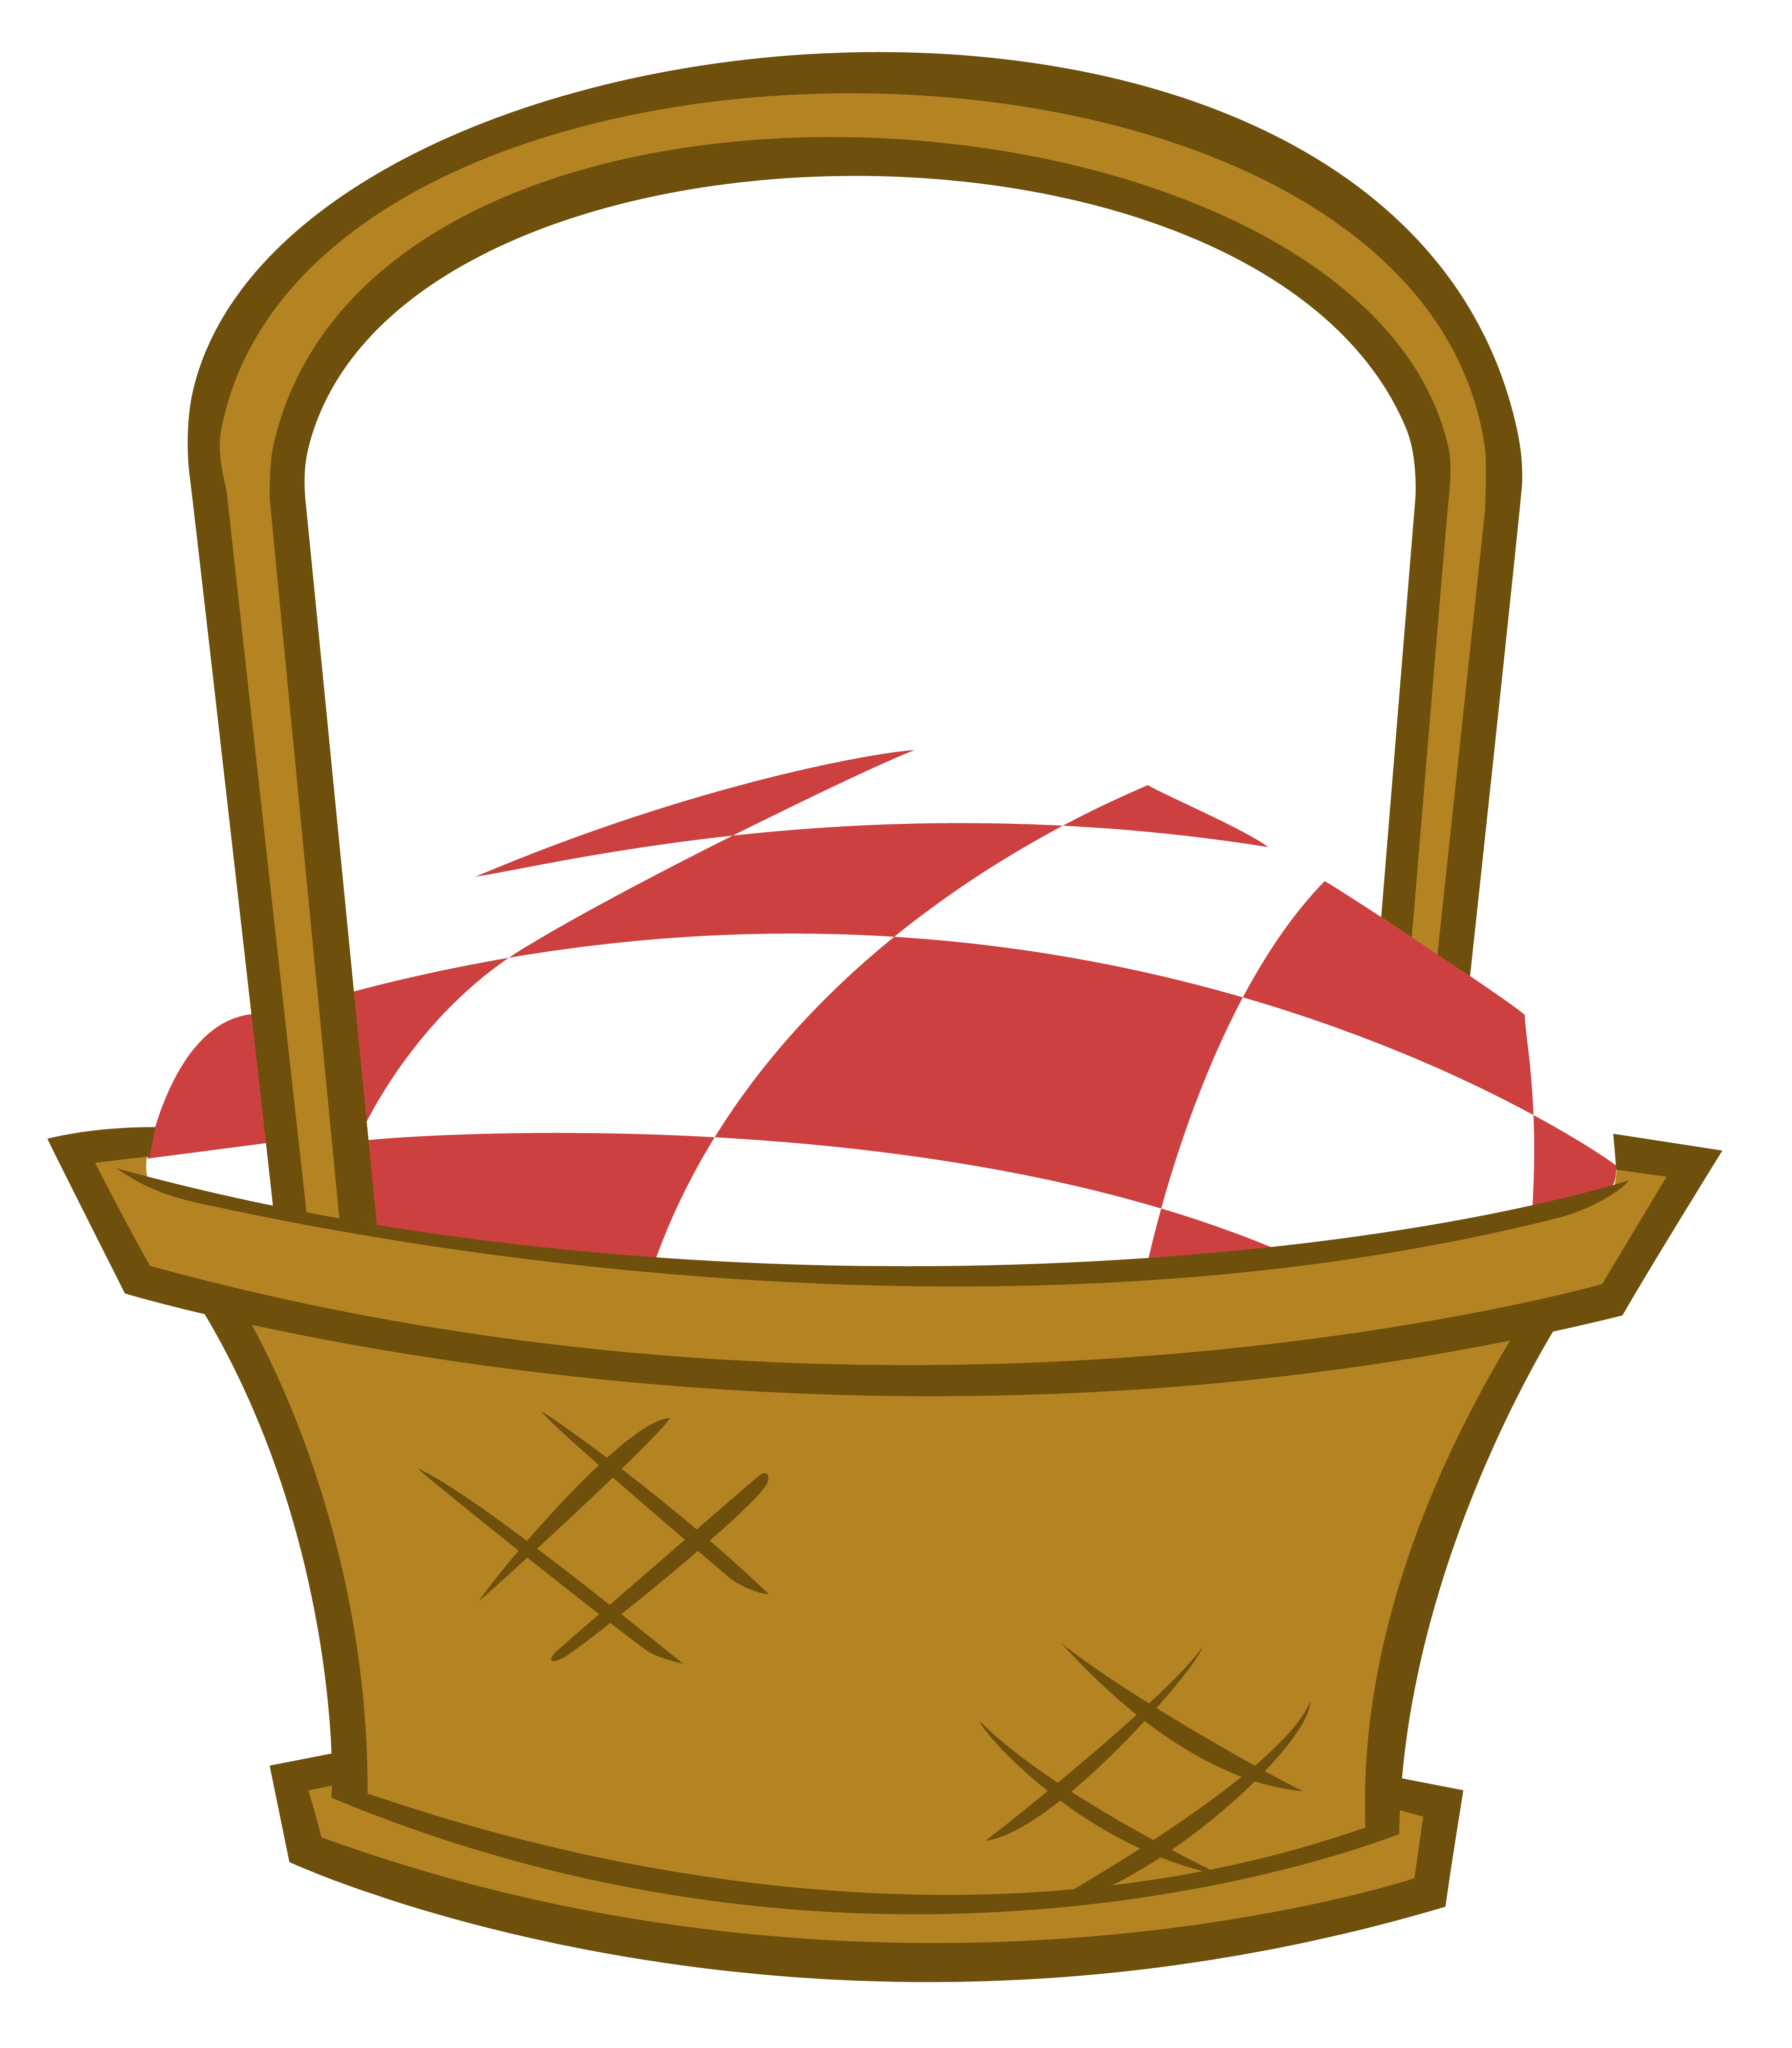 Images Of Picnic Baskets - Clipart library